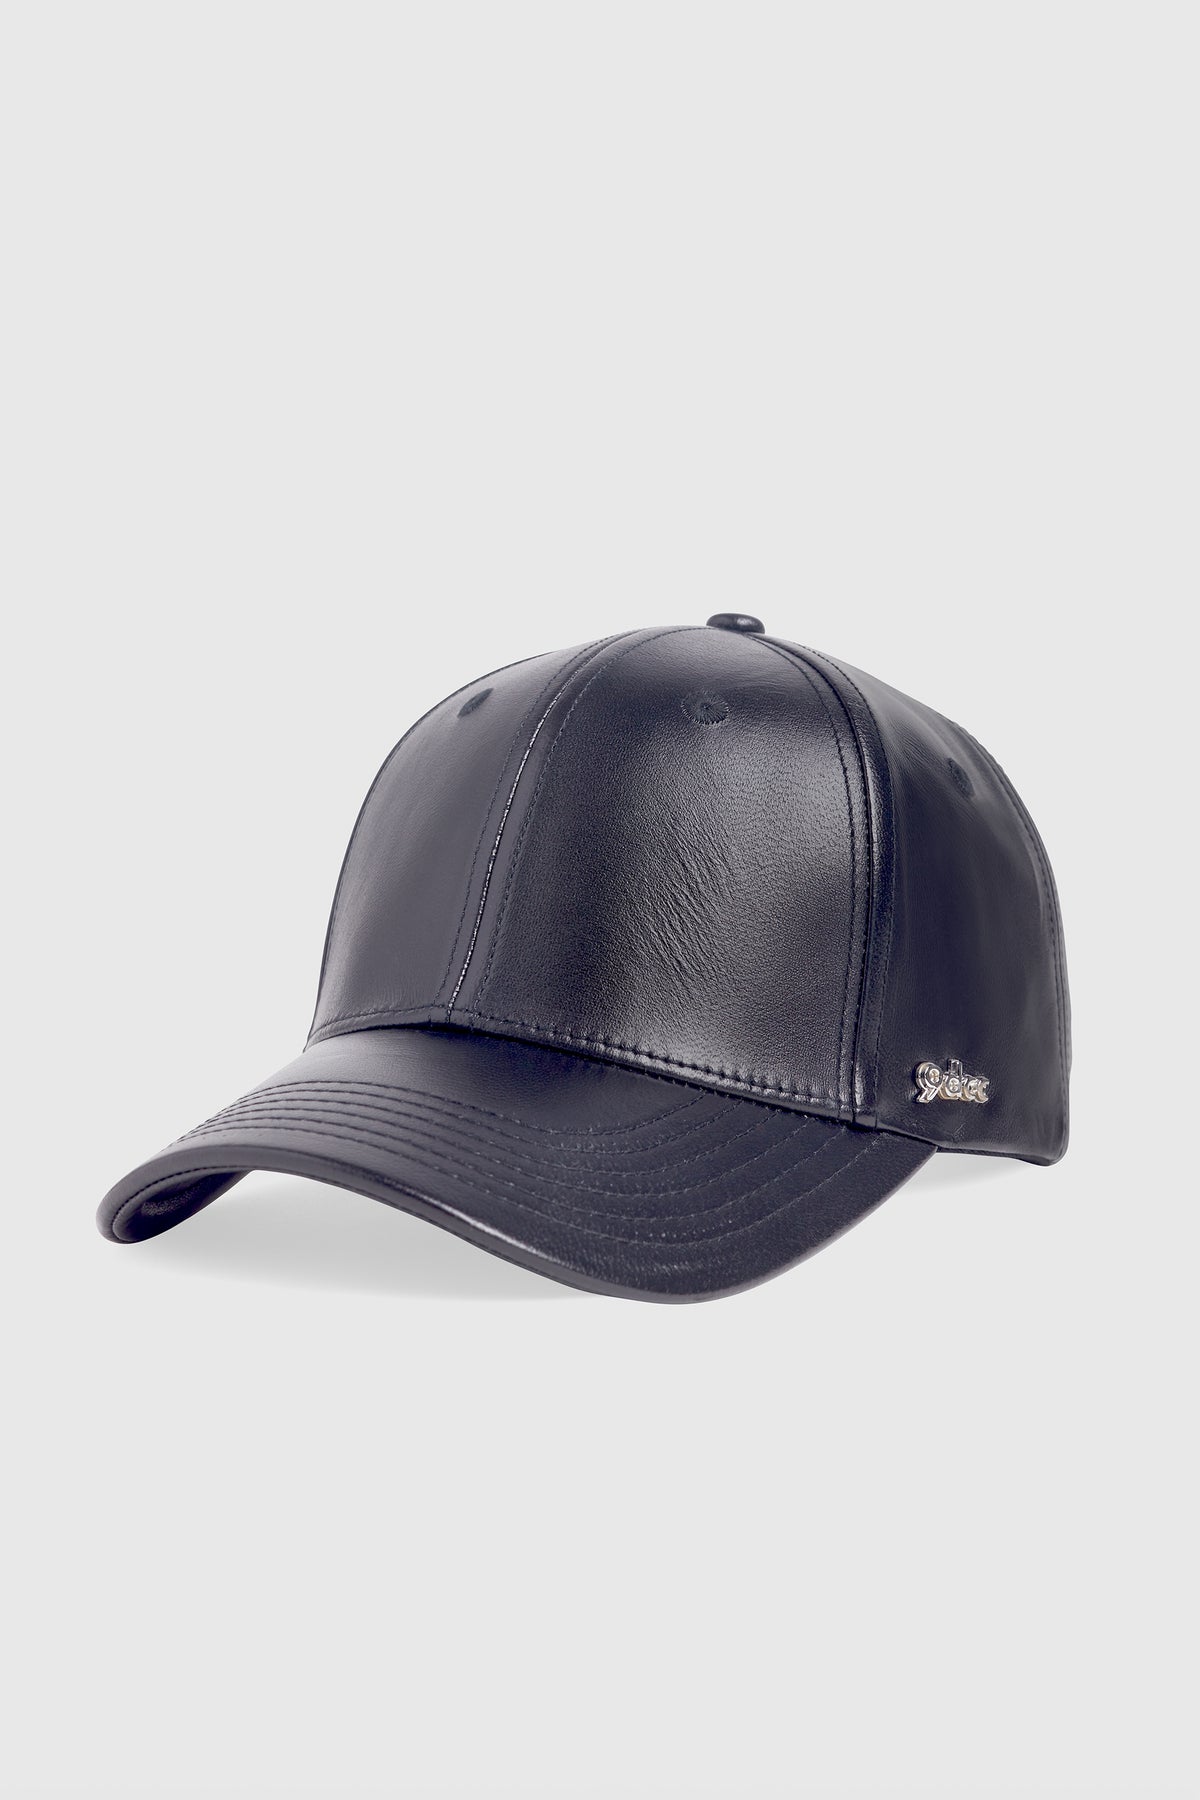 9DCC LUXE BLACK LEATHER STRUCTURED BALL CAP WITH PATENT FINISH